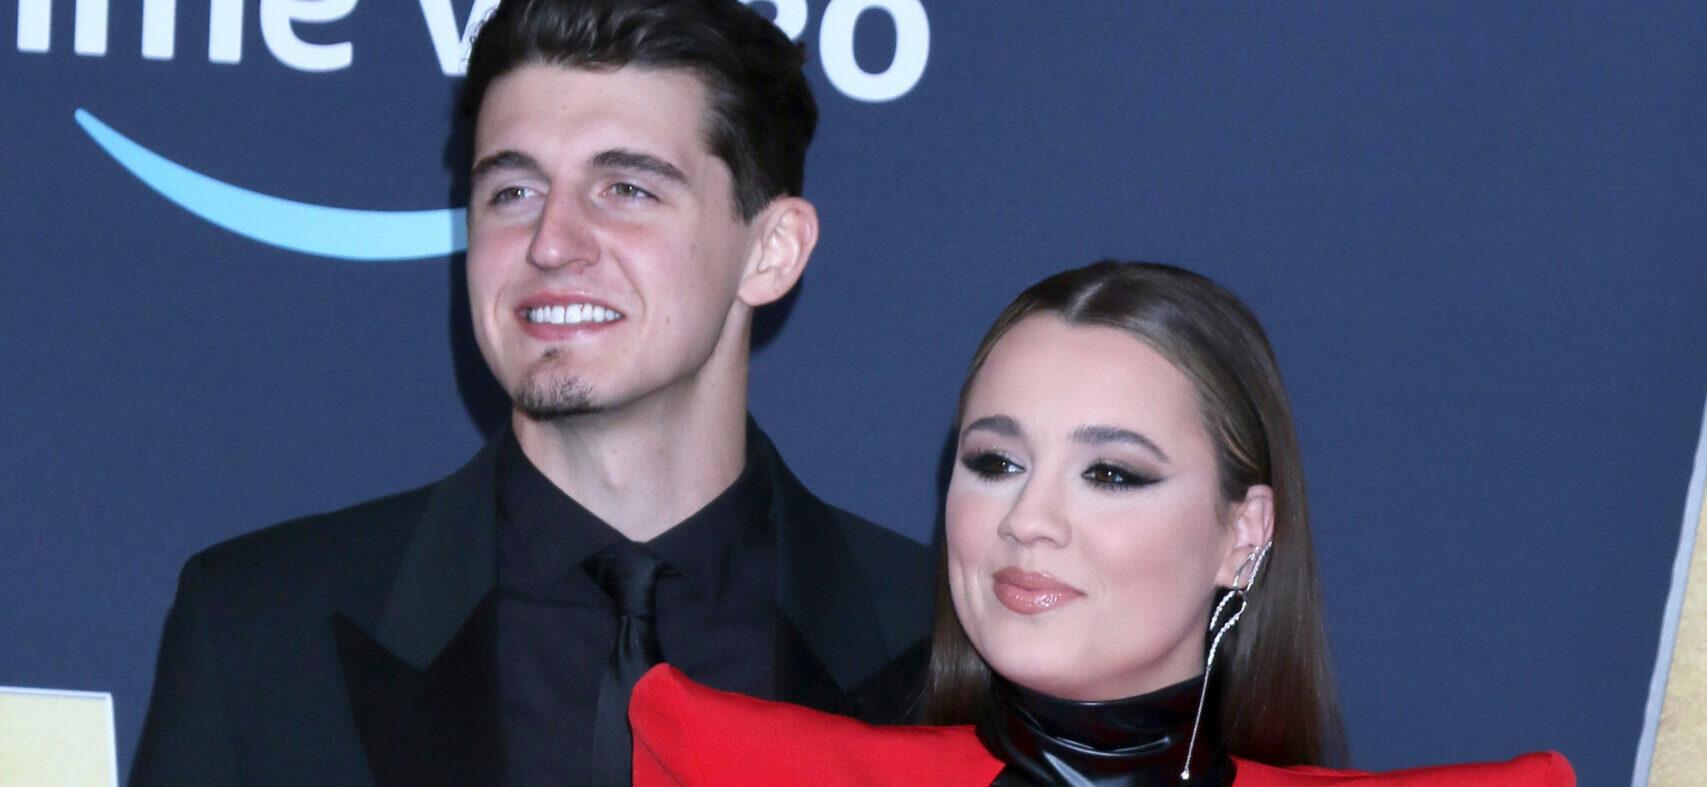 Cade Foehner, Gabby Barrett at the 2022 Academy of Country Music Awards